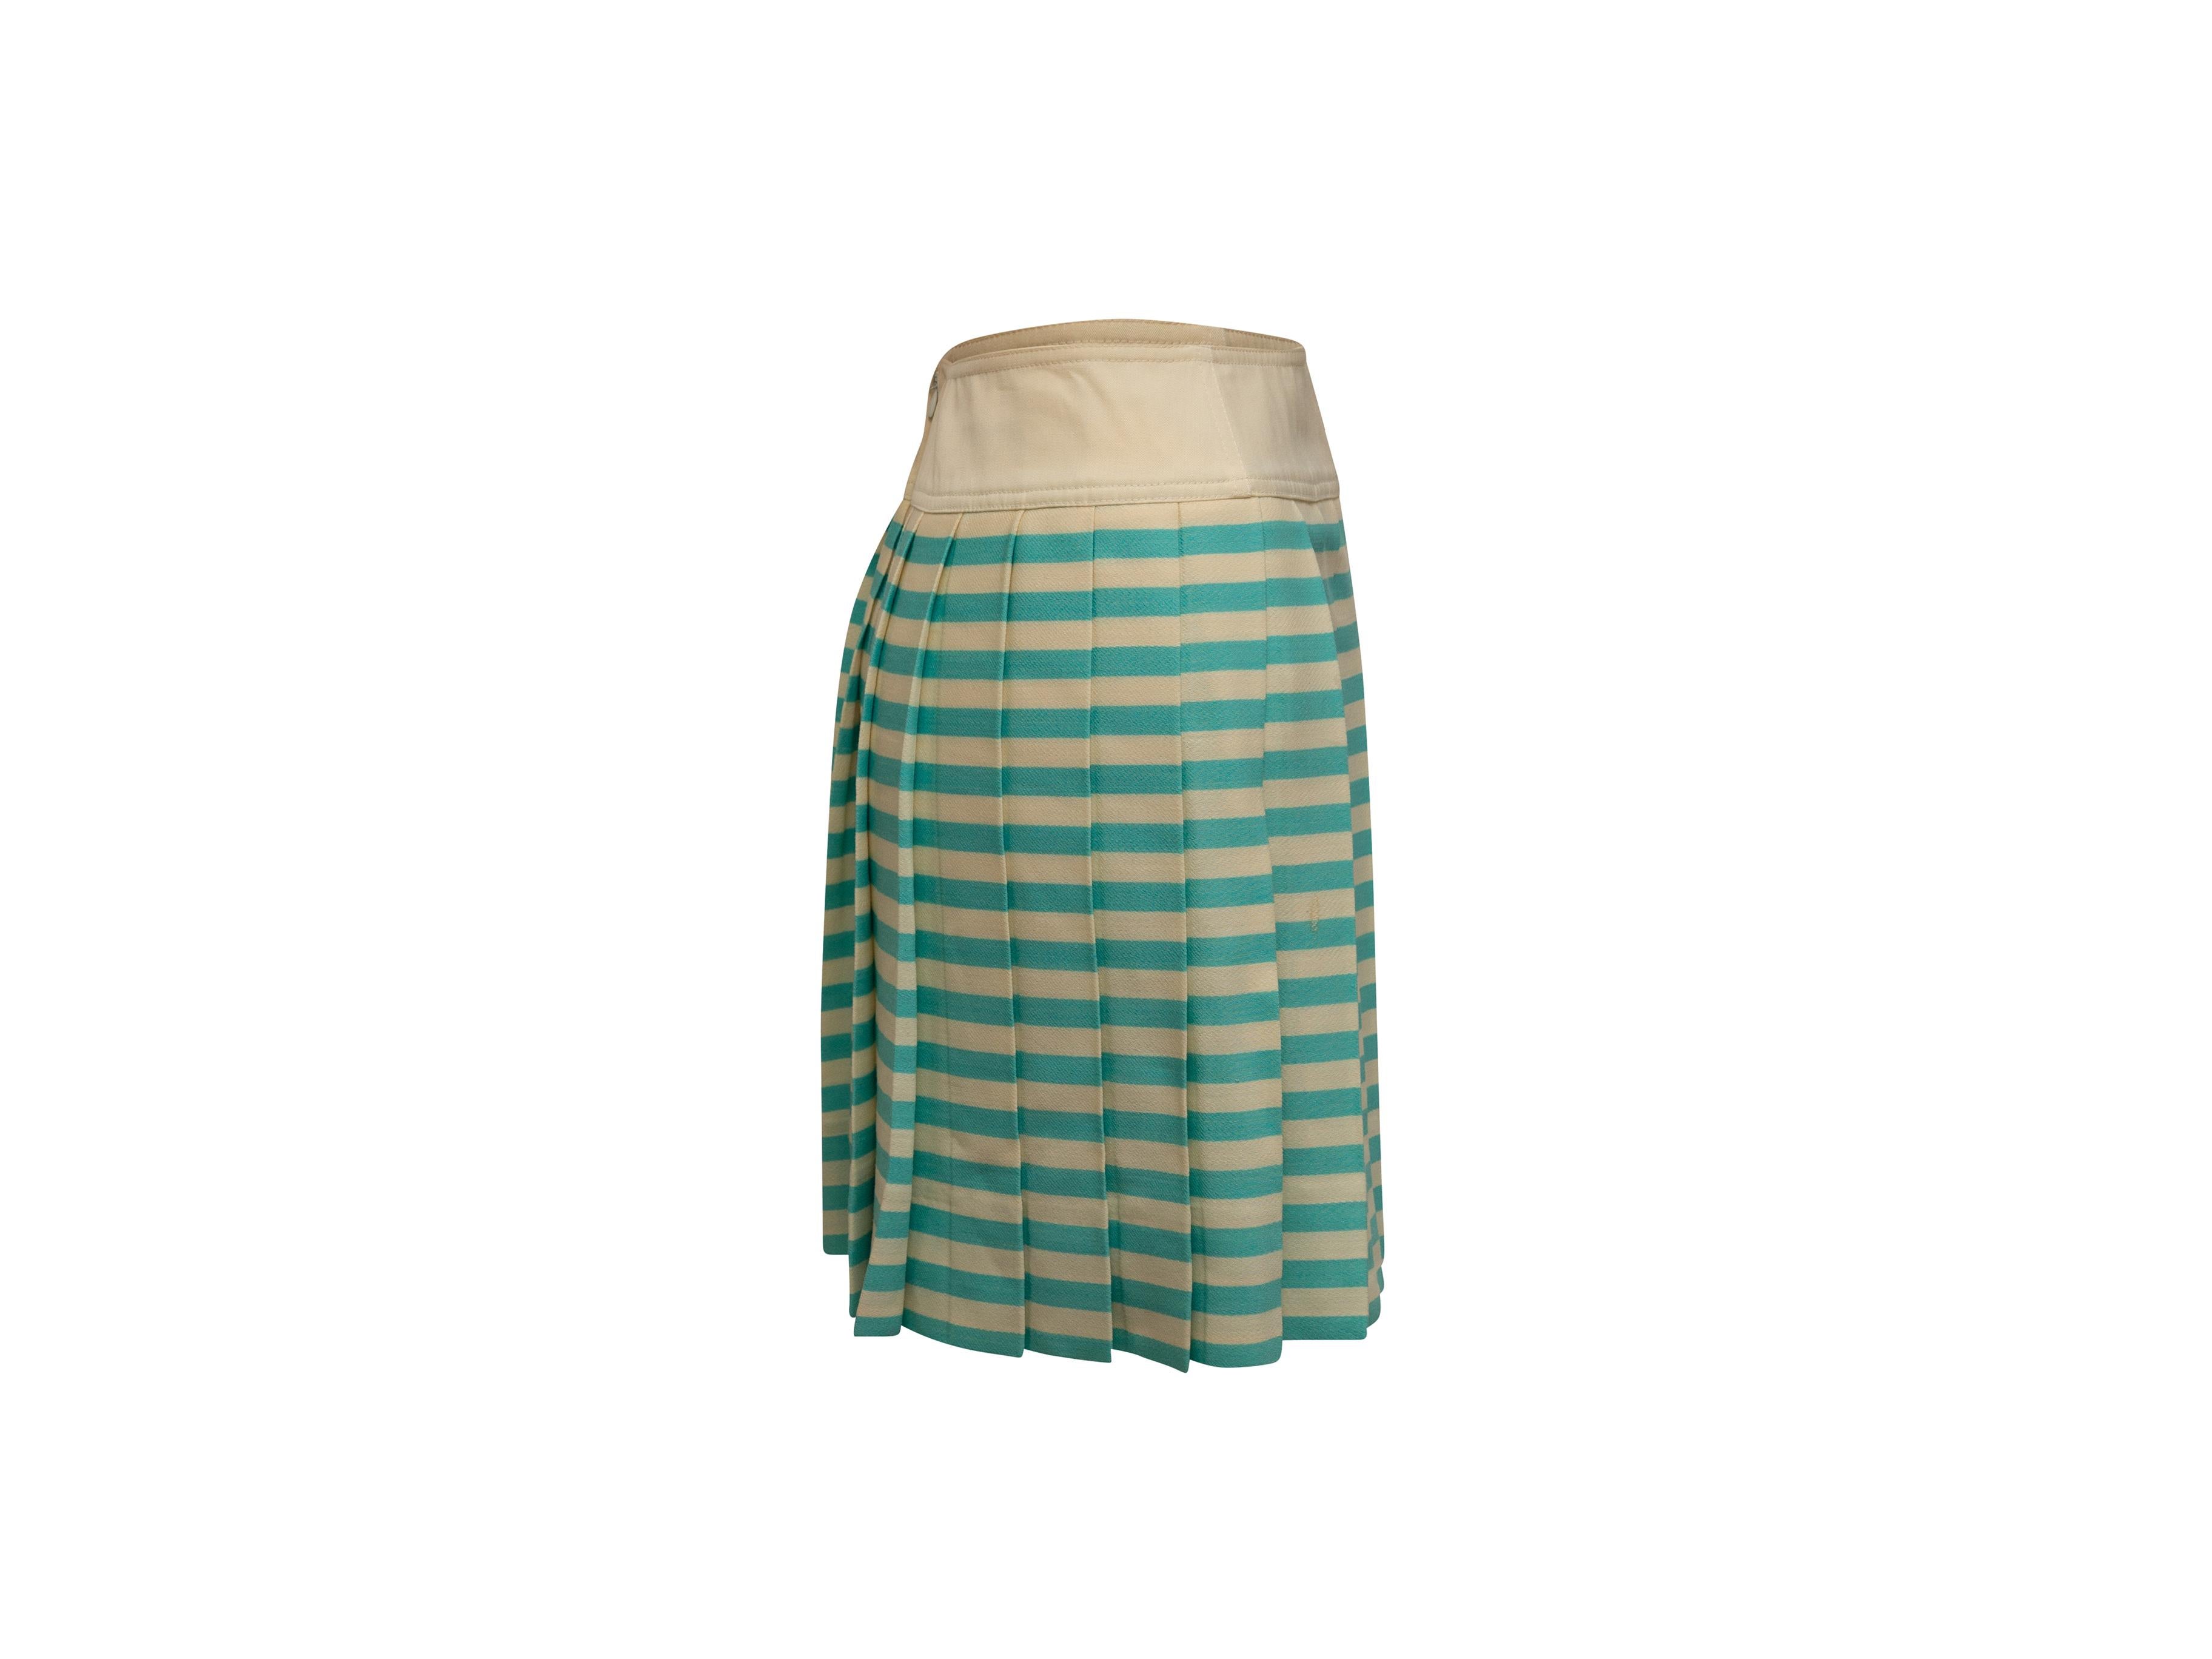 Product details: Vintage cream and turquoise wool pleated mini skirt by Courreges. Striped pattern throughout. Zip closure at back. Designer size 36. 28